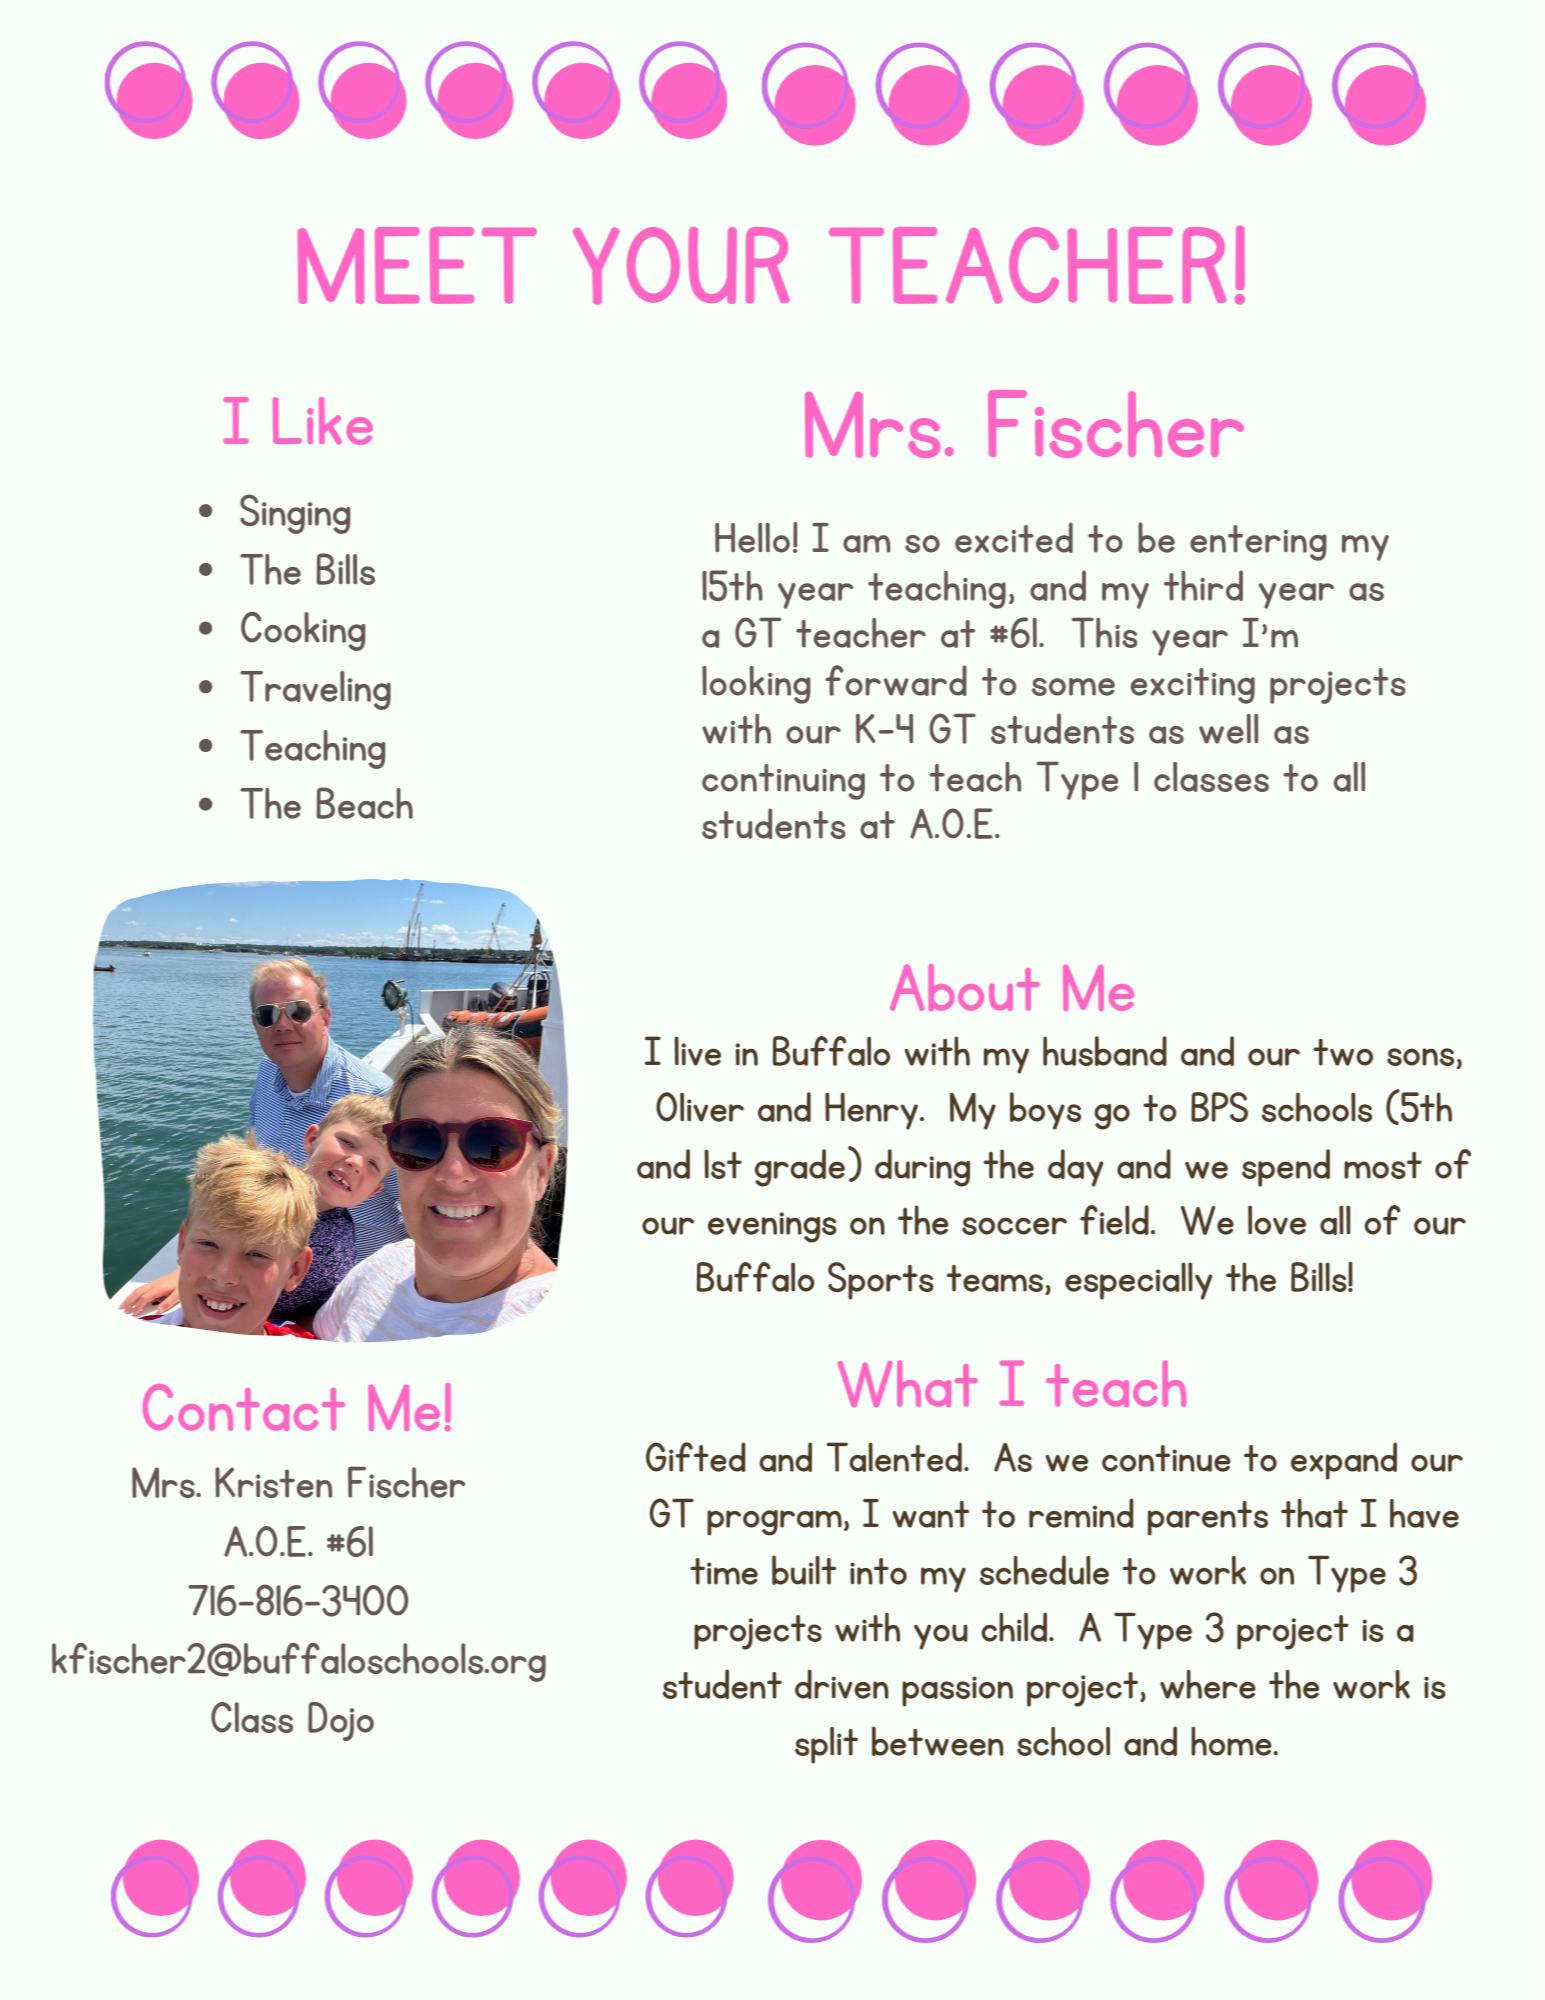   MEET YOUR TEACHER!  1 Like  • Singing  • The Bills  Cooking  Traveling  • Teaching  • The Beach  Confacf Mel  Mrs. Kristen Fischer  A.O.E.  716-816-3HOO  kfischer2@buffaloschools.org  Class Dojo  Mrs. Fischer  Hello! I am so excited to be entering my  15th year teaching, and my third year as  a GT teacher at #61. This year I'm  looking forward to some exciting projects  with our K-H GT students as well as  continuing to teach Type I classes to all  students at A.O.E.  About Me  I live in Buffalo with my husband and our two sons,  Oliver and Henry. My boys go to BPS schools (5th  and 1st grade) during the day and we spend most of  our evenings on the soccer field. We love all of our  Buffalo Sports teams, especially the Bills!  What I teach  Gifted and Talented. As we continue to expand our  GT program, I want to remind parents that I have  time built into my schedule to work on Type 3  projects with you child. A Type 3 project is a  student driven passion project, where the work is  split between school and home.  